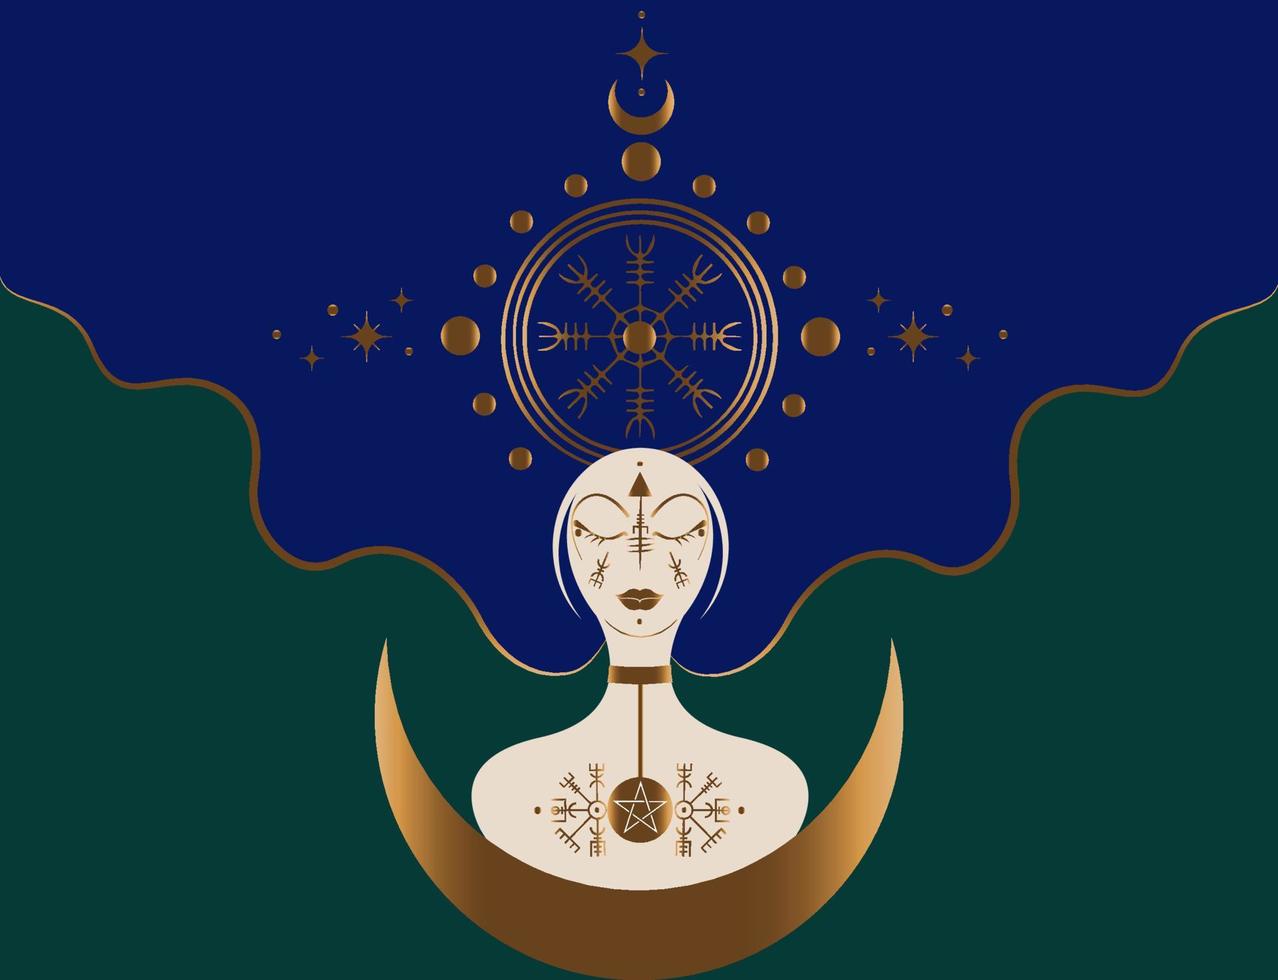 Freya goddess, Scandinavian norse mythology associated with love, beauty, fertility, sex, war, gold. Freyja rules over her heavenly field, vector isolated on green and blue background